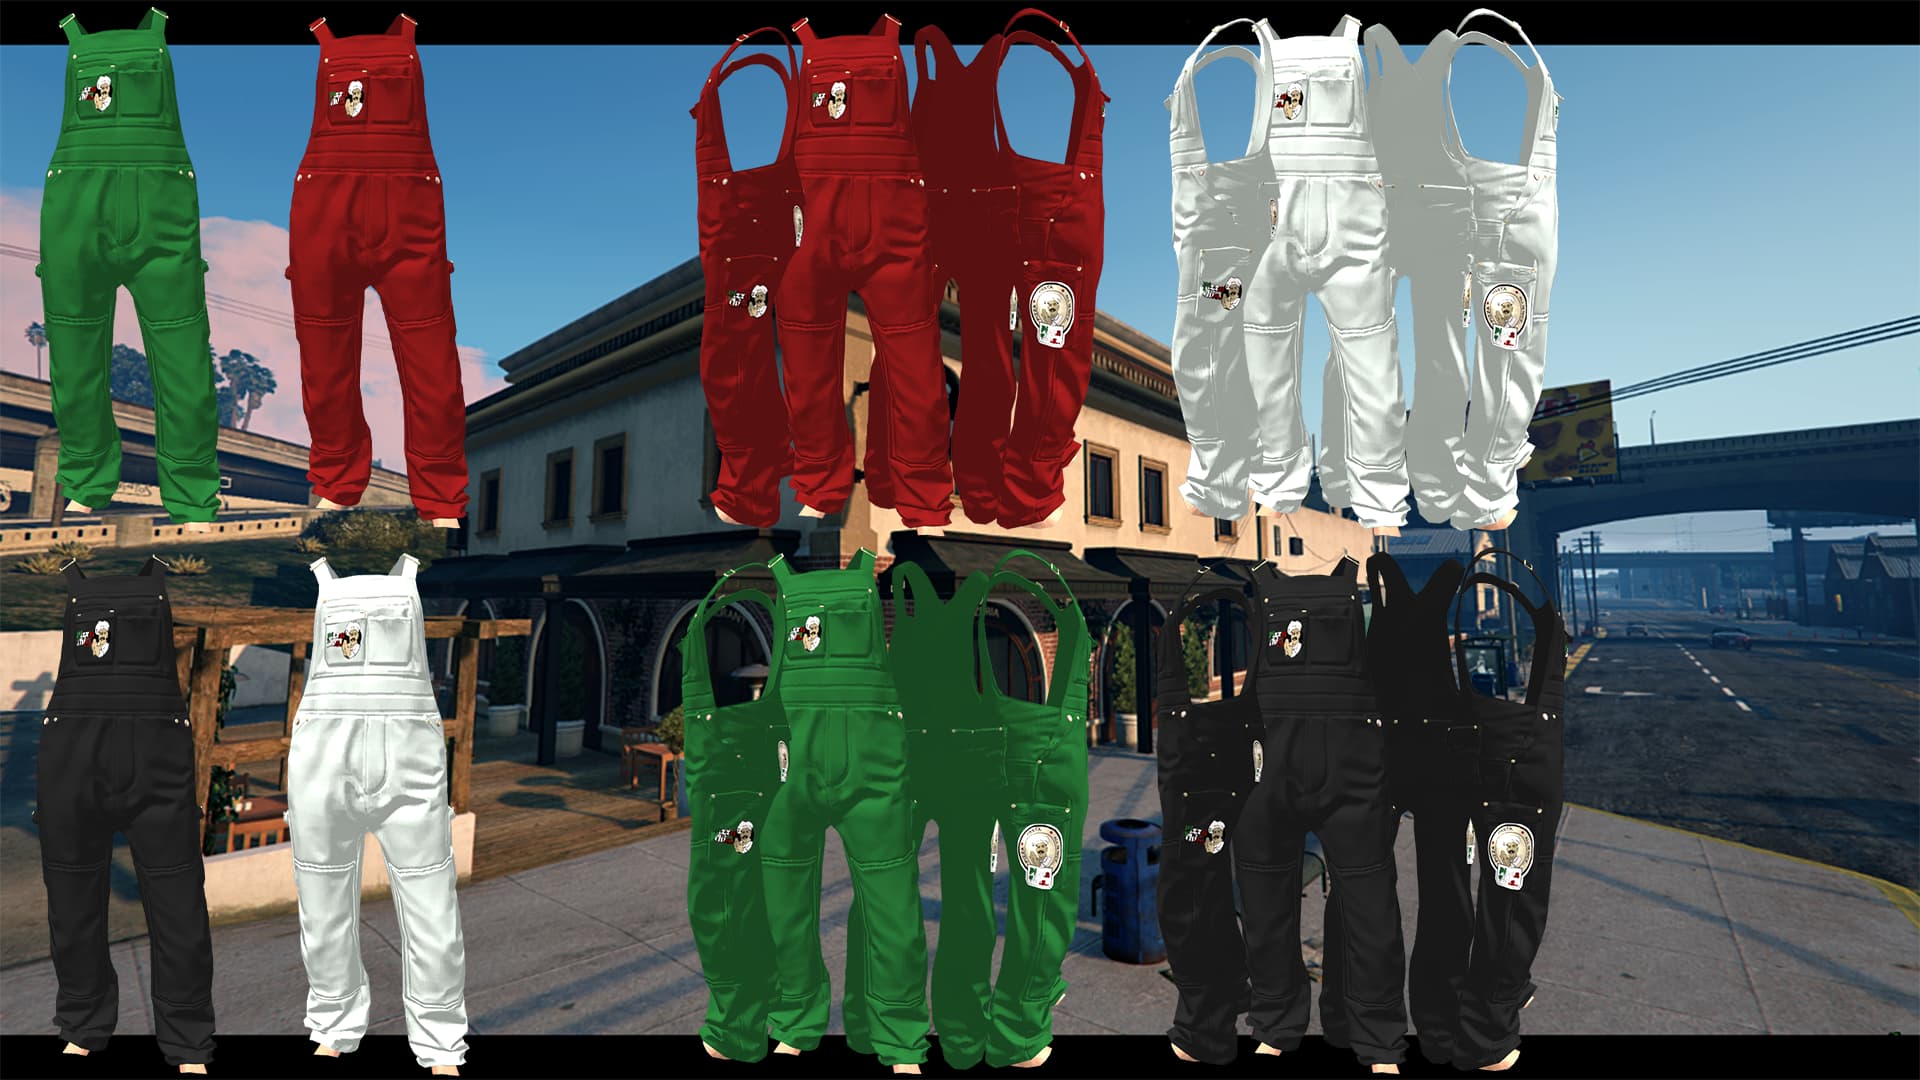 PAID] UwU cafe Clothing (Male and female) - Releases - Cfx.re